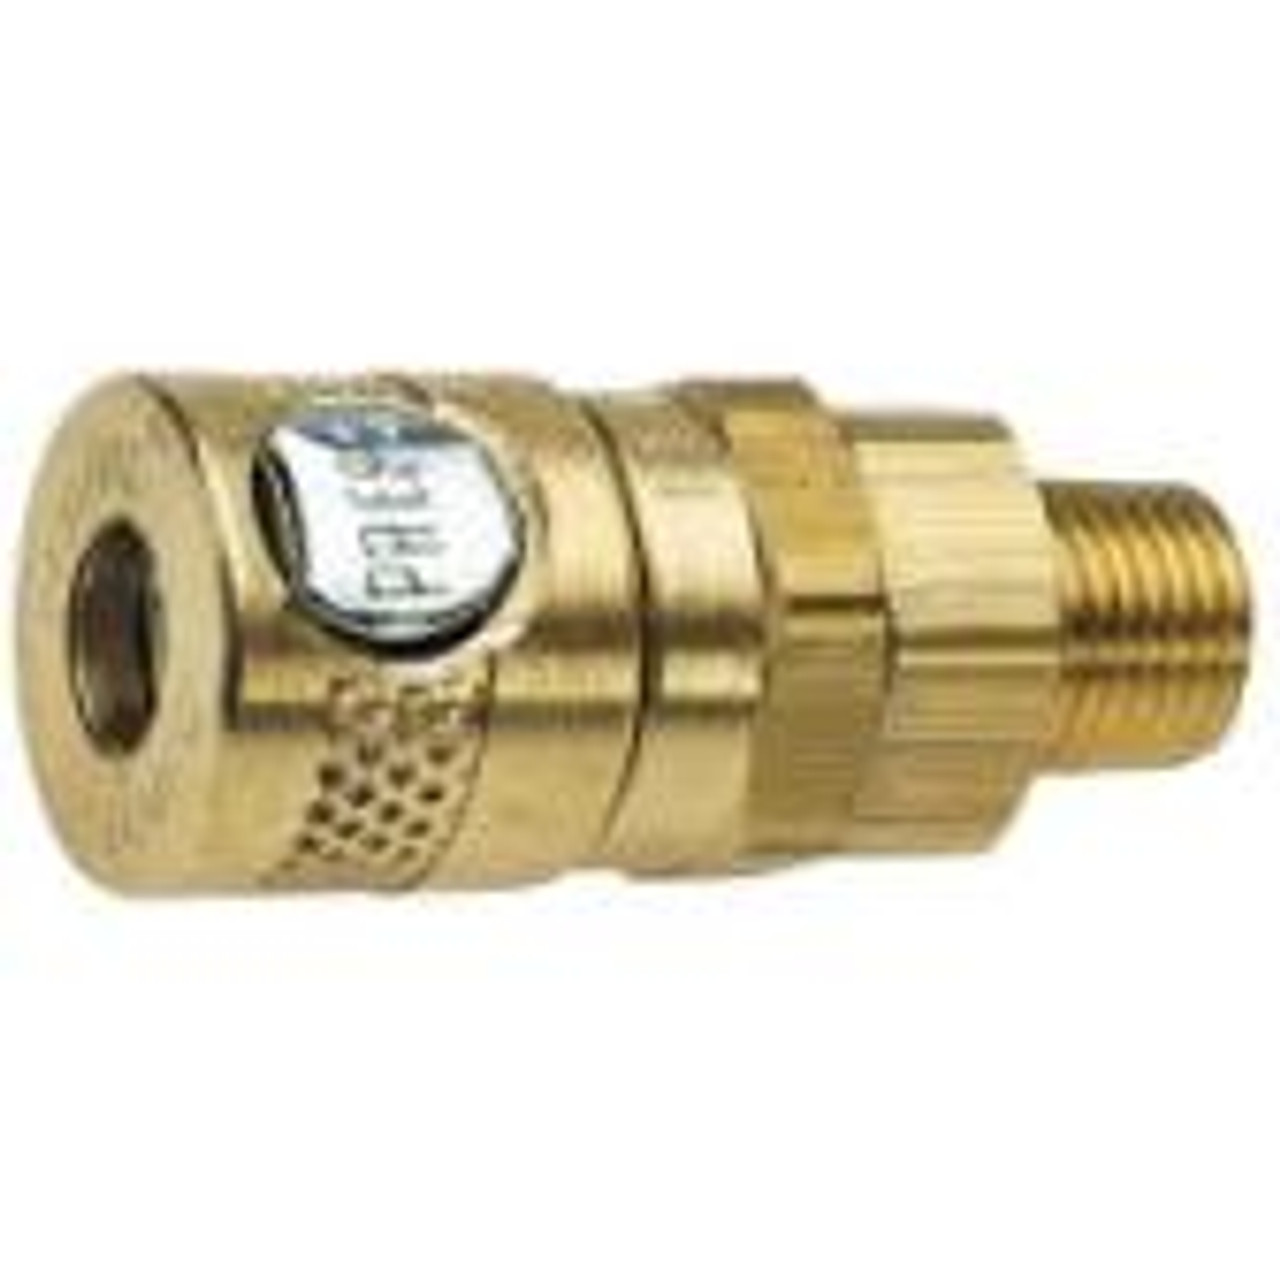 Air Fitting 310M4 1/4" Male